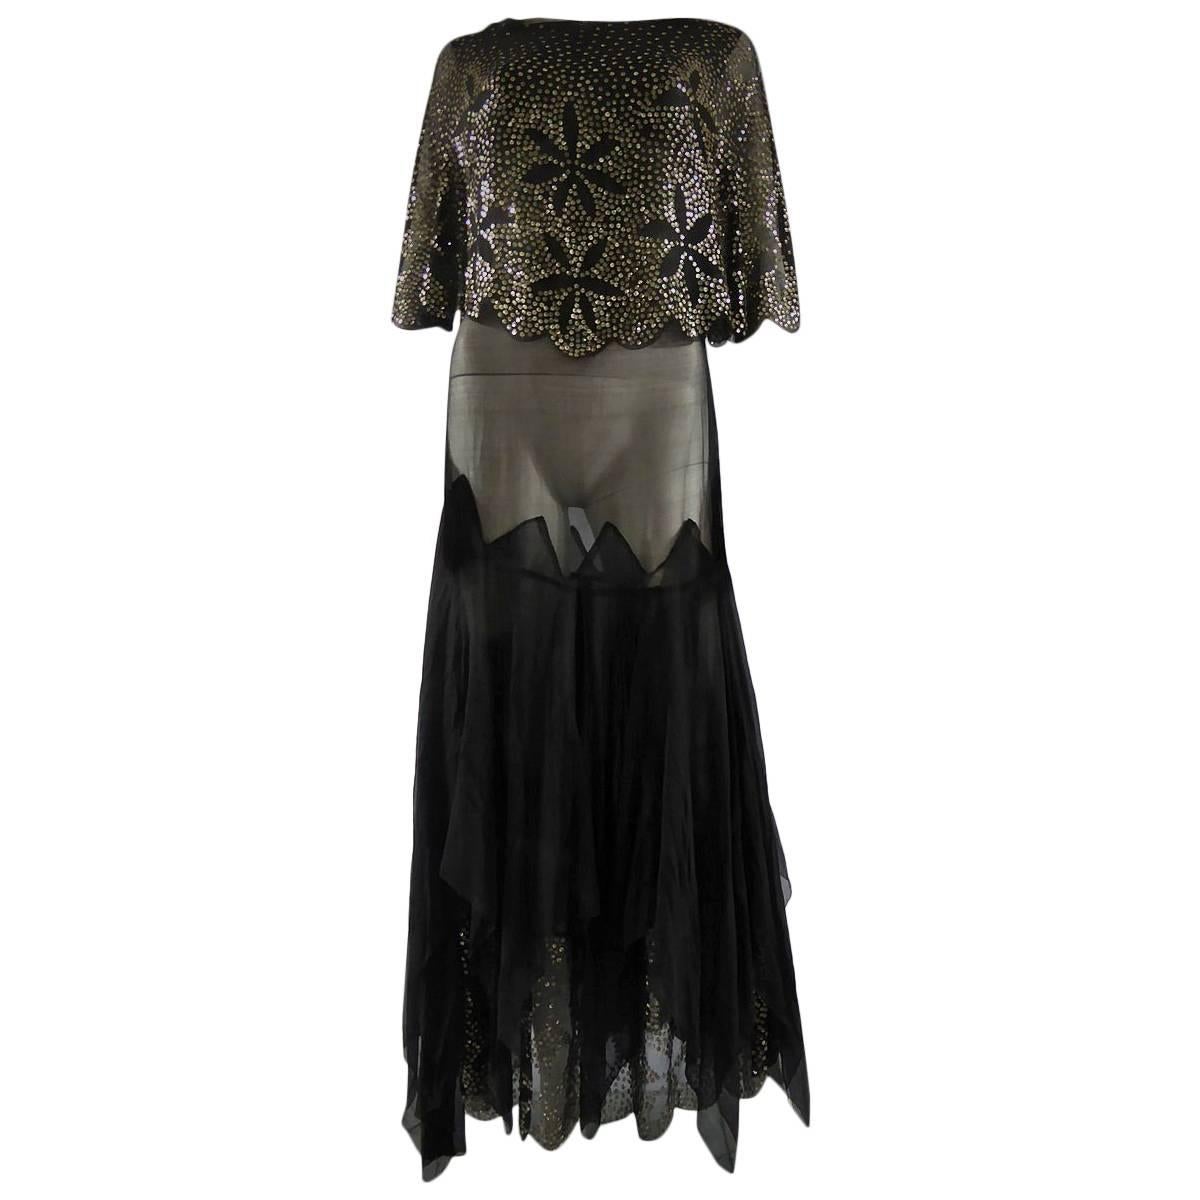 Black Silk Gauze Dress With Embroidered Silver Sequins, Circa 1935